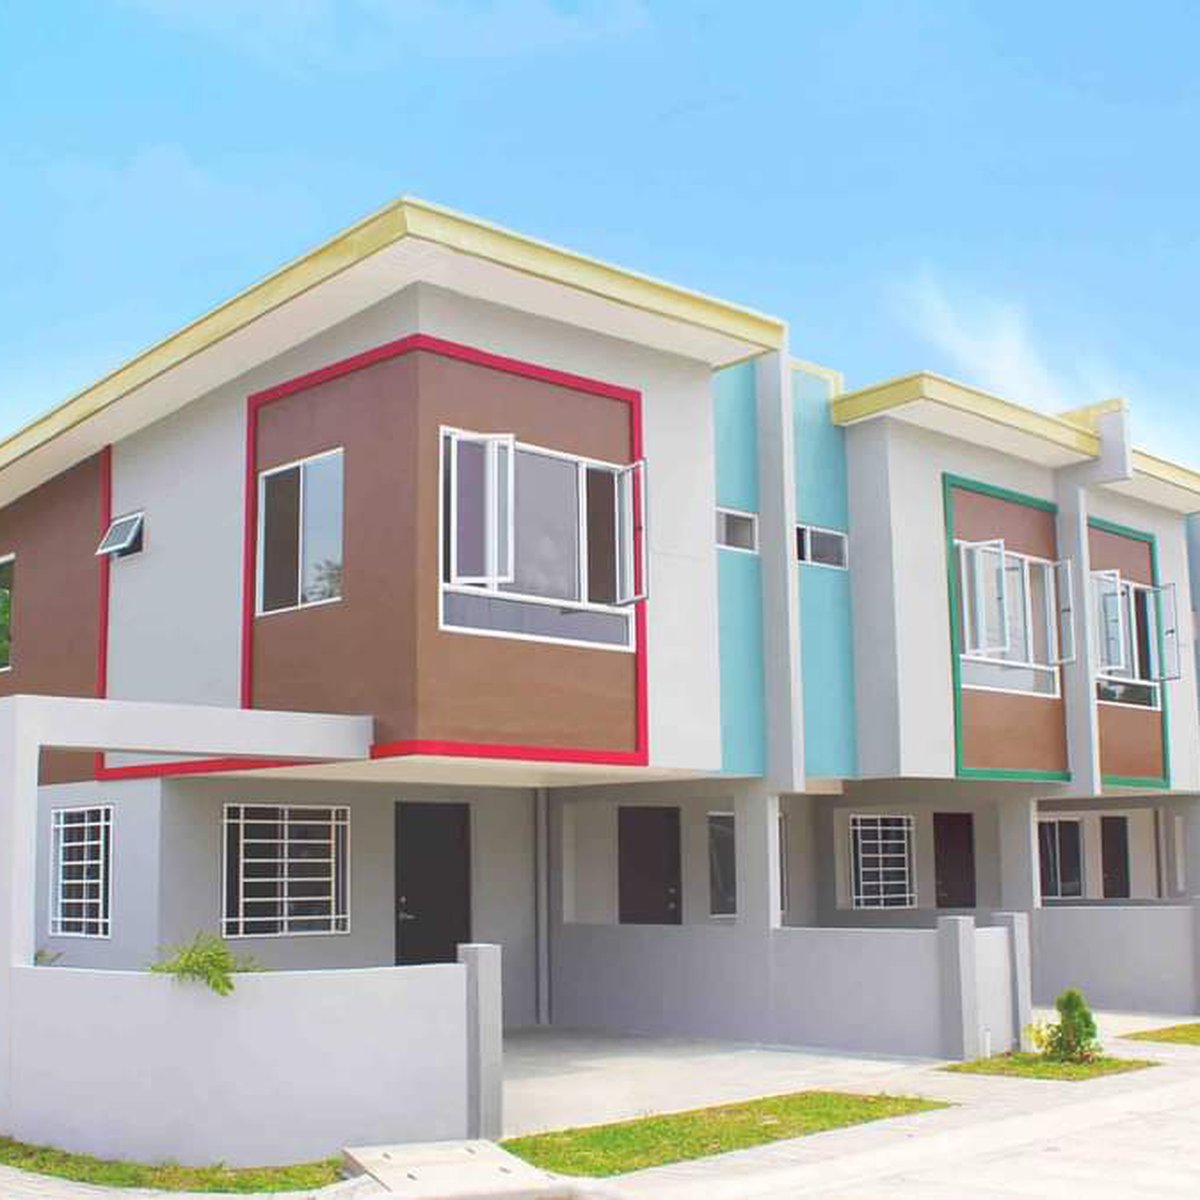 Pre-Selling 3-bedroom Townhouse For Sale in Imus Cavite